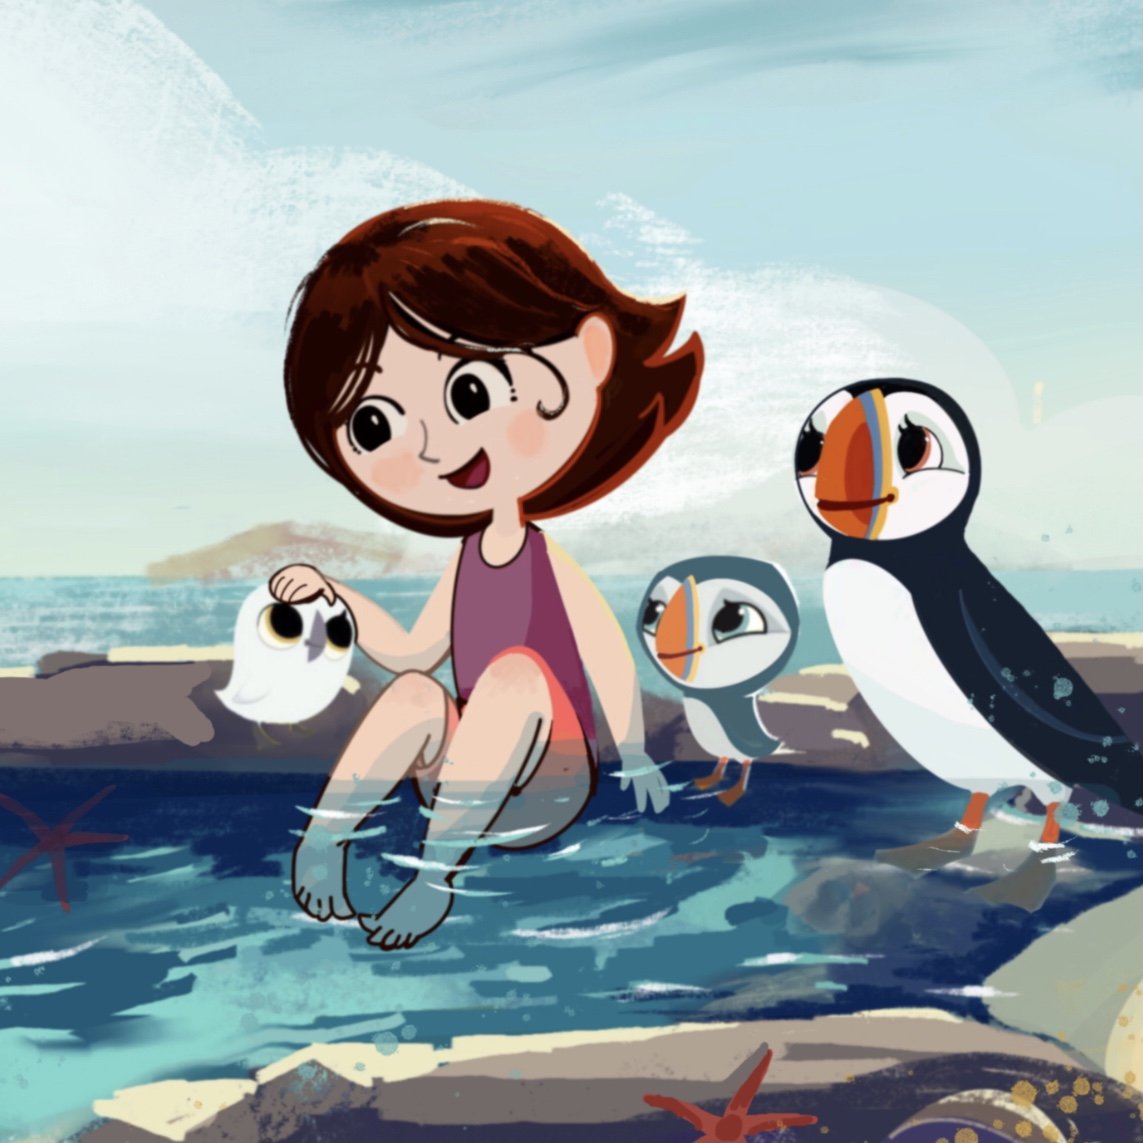 New little fanart of Song of the Sea and Puffin Rock
#songofthesea #puffinrock  #CartoonSaloonfanart